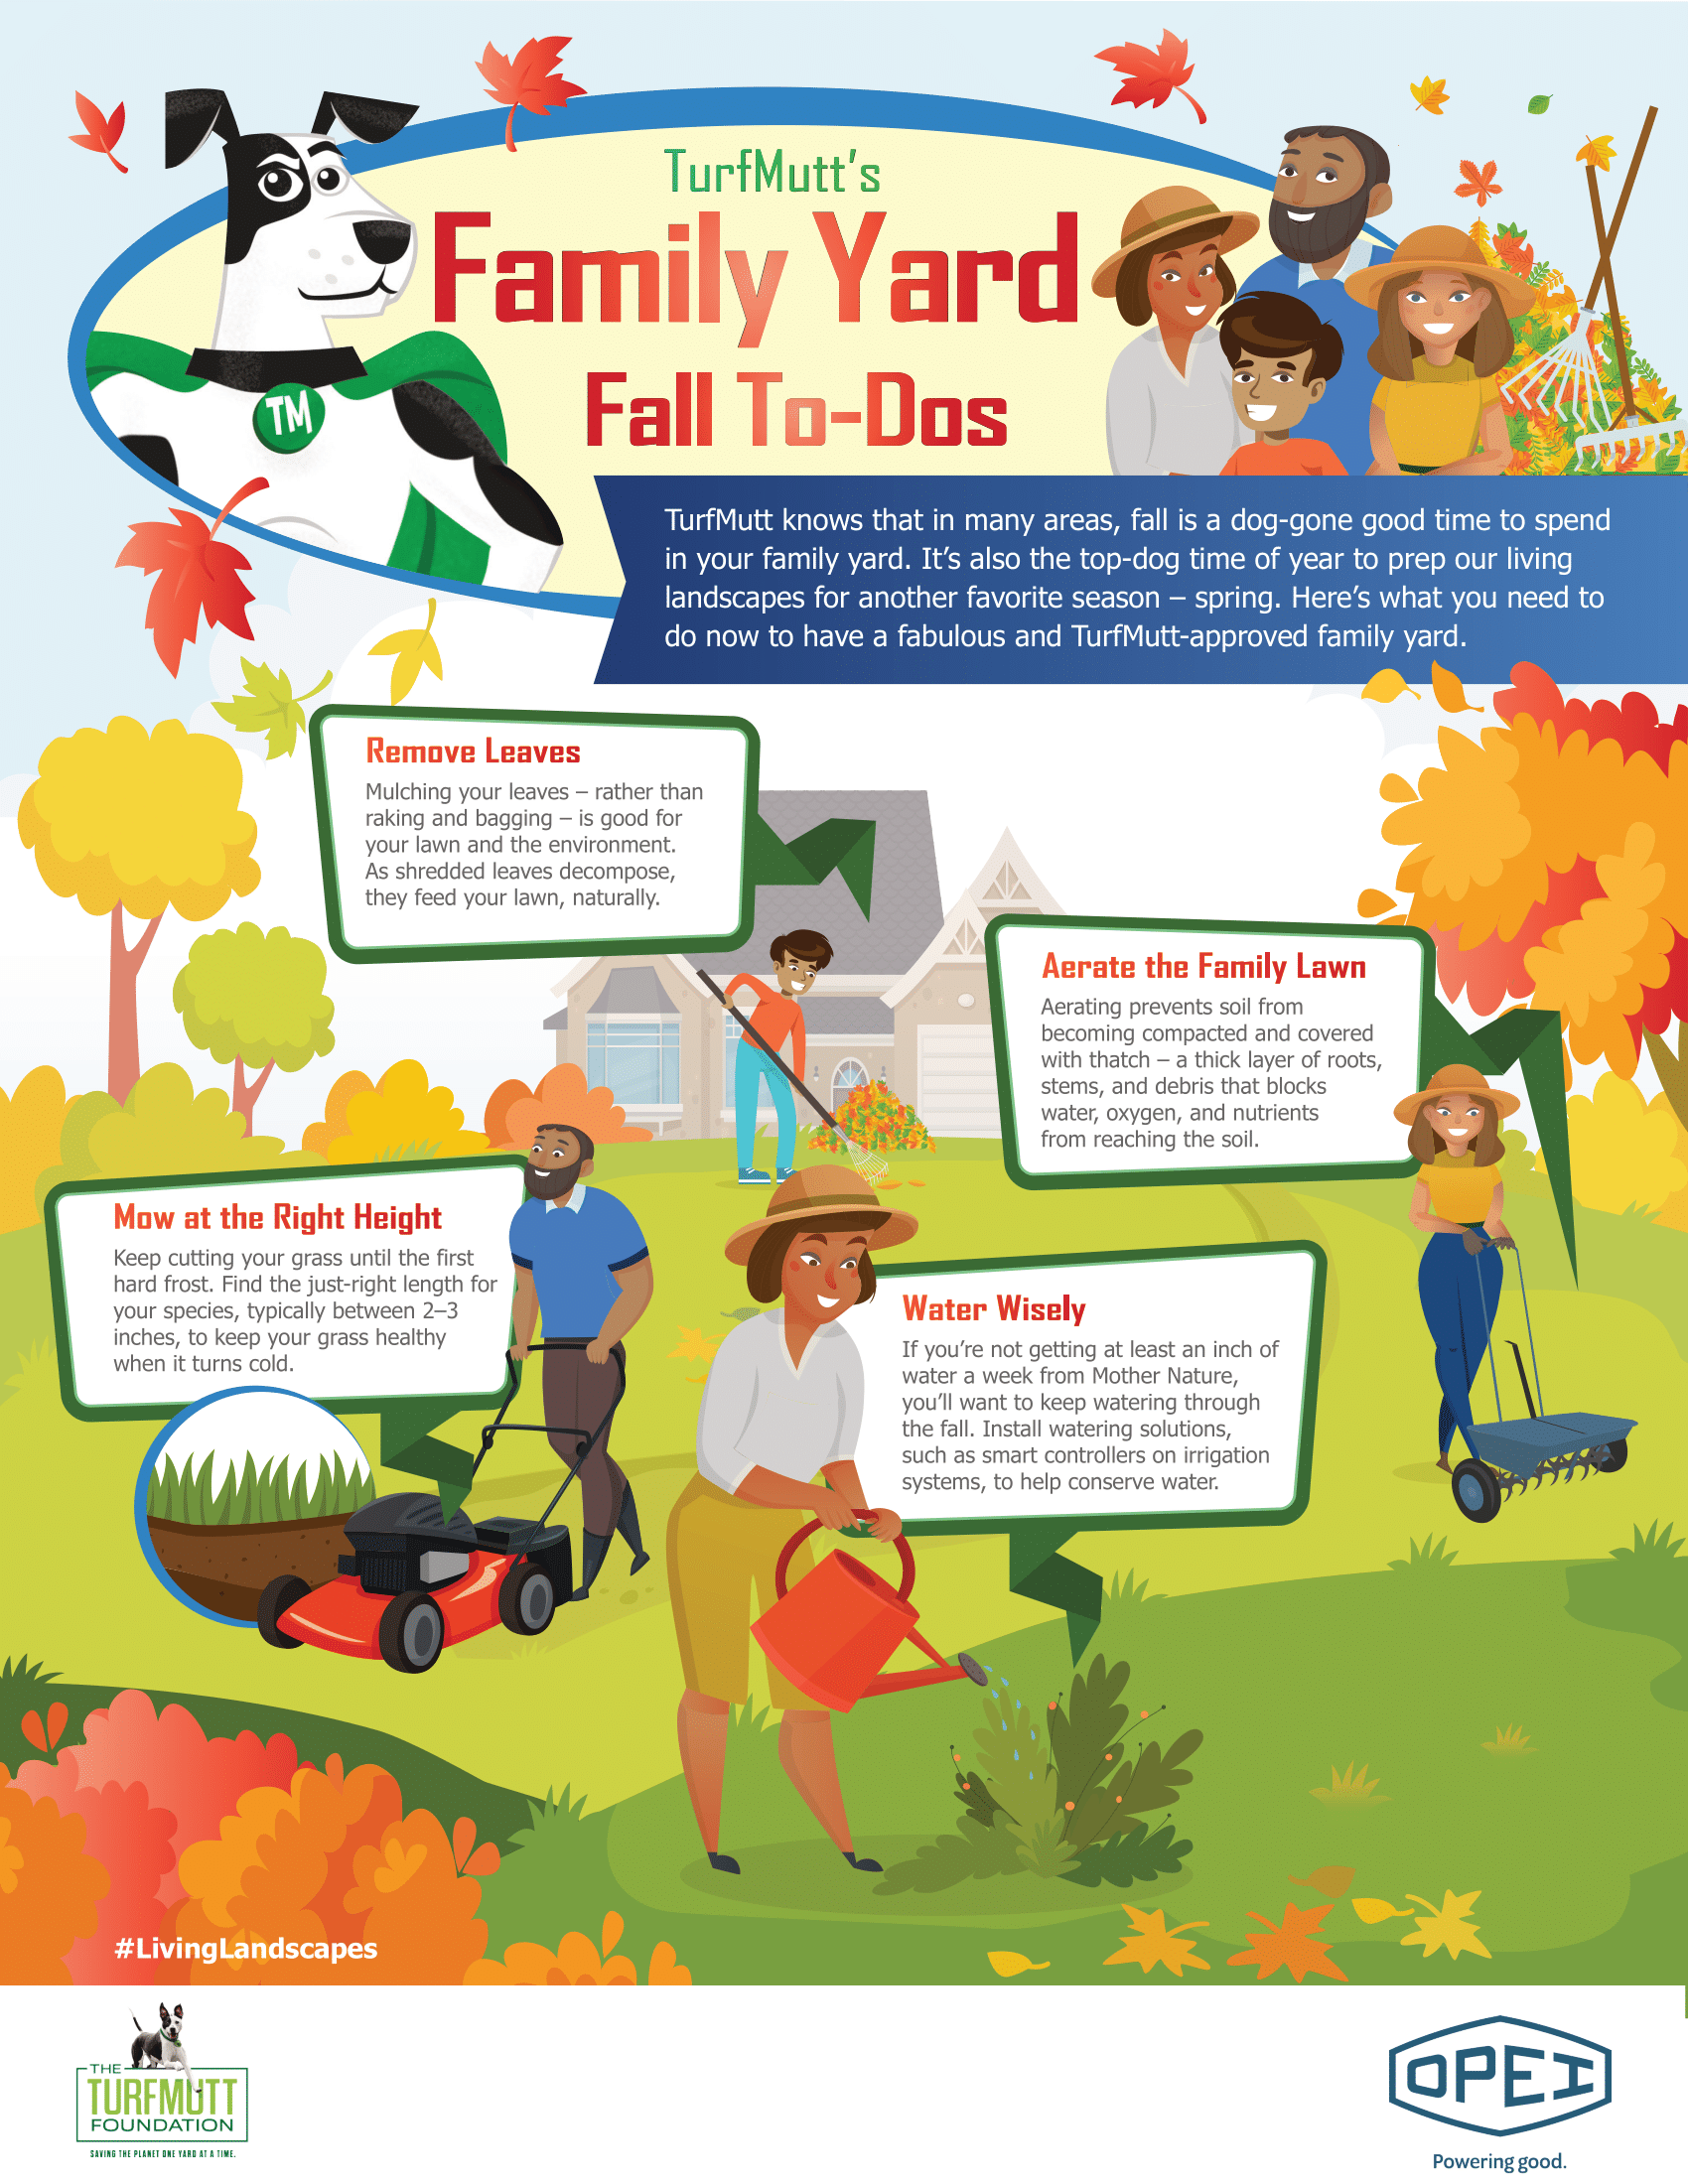 The Fall Family Yard: Tips to make it work for you